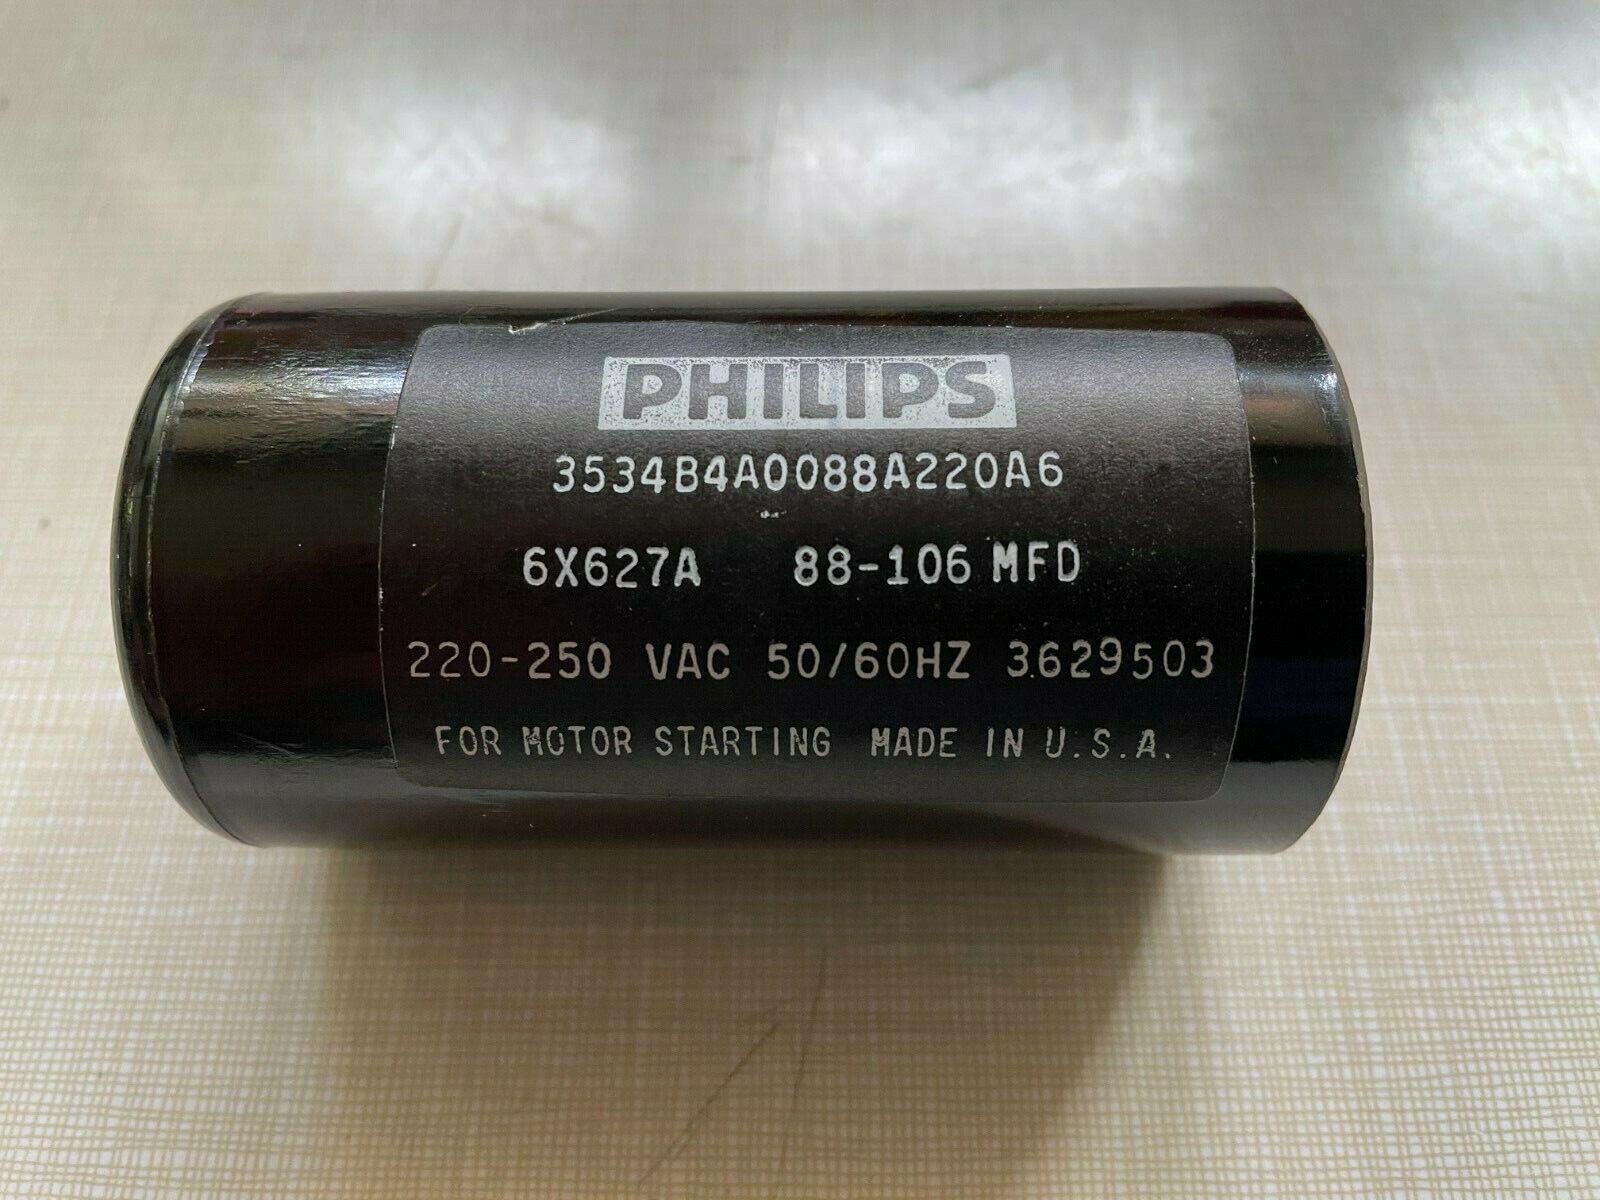 MOTOR START CAPACITOR, 88-106 MFD uF 220-250VAC Philips 6X627A Made in USA